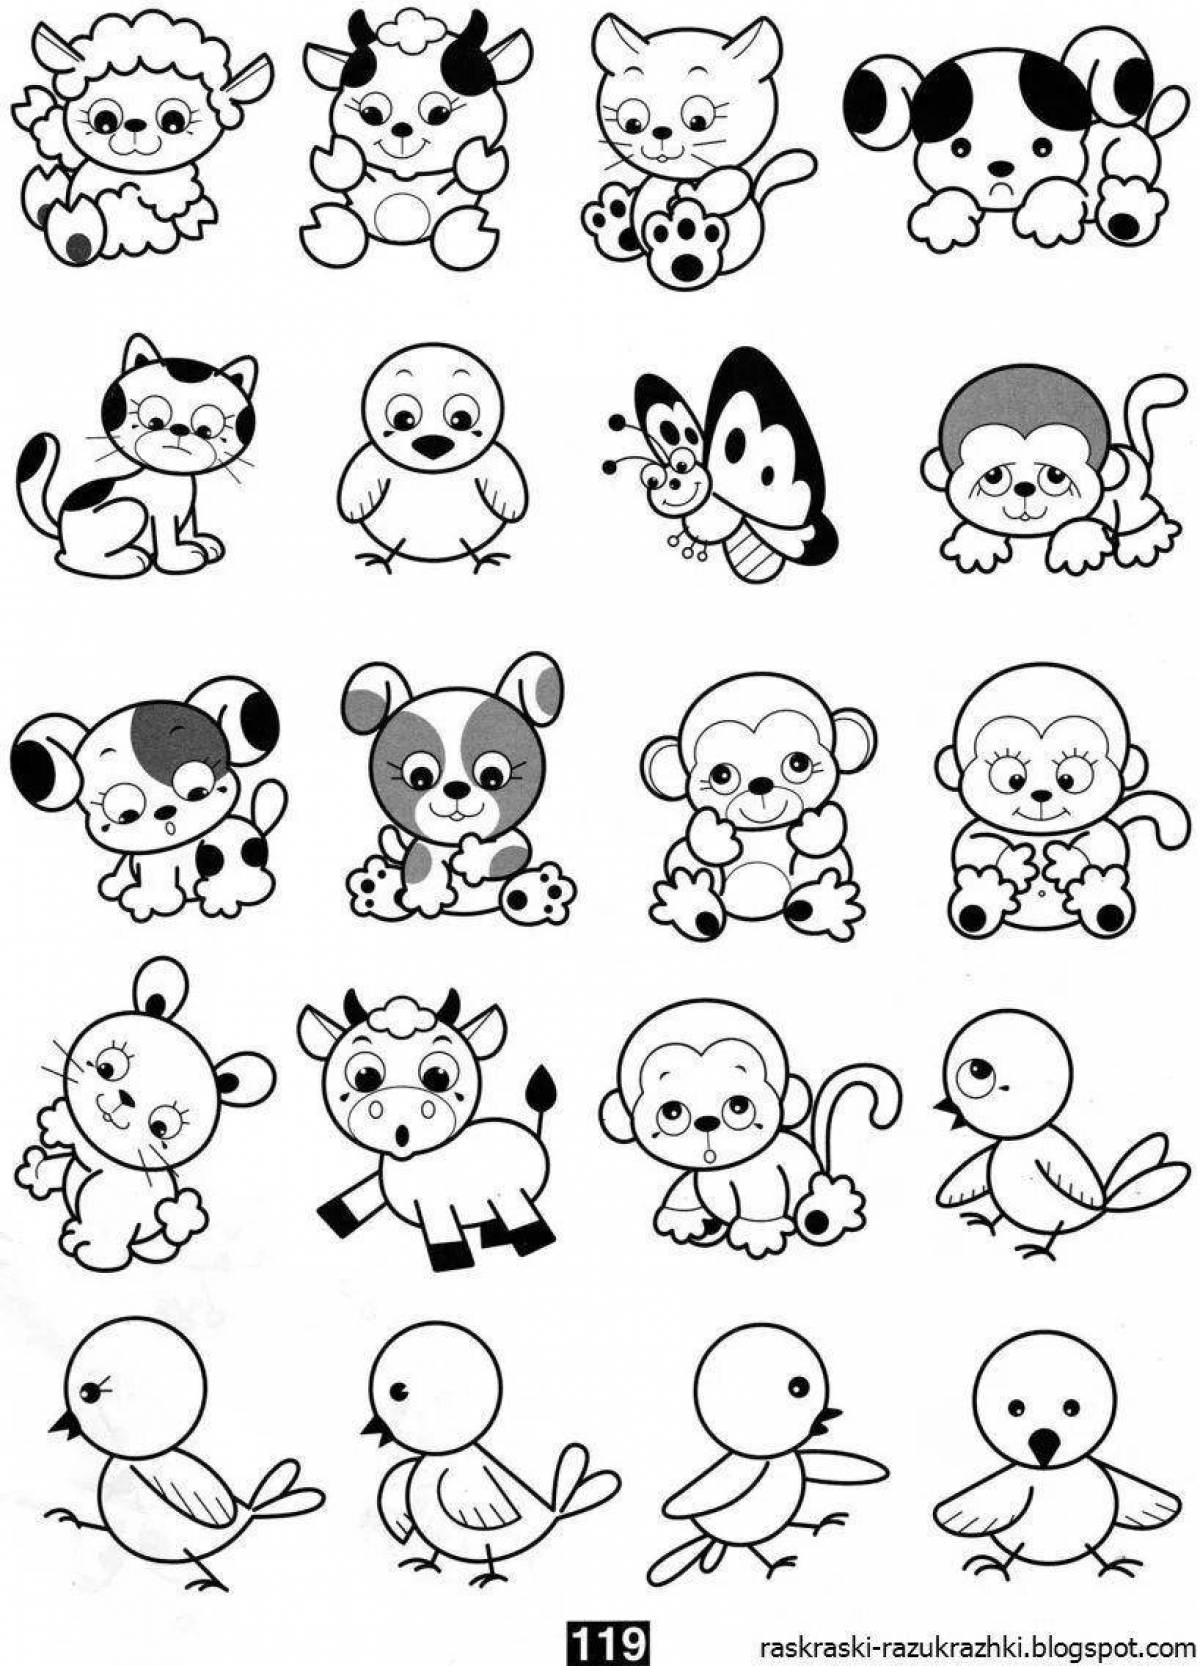 Charming coloring cute little drawings